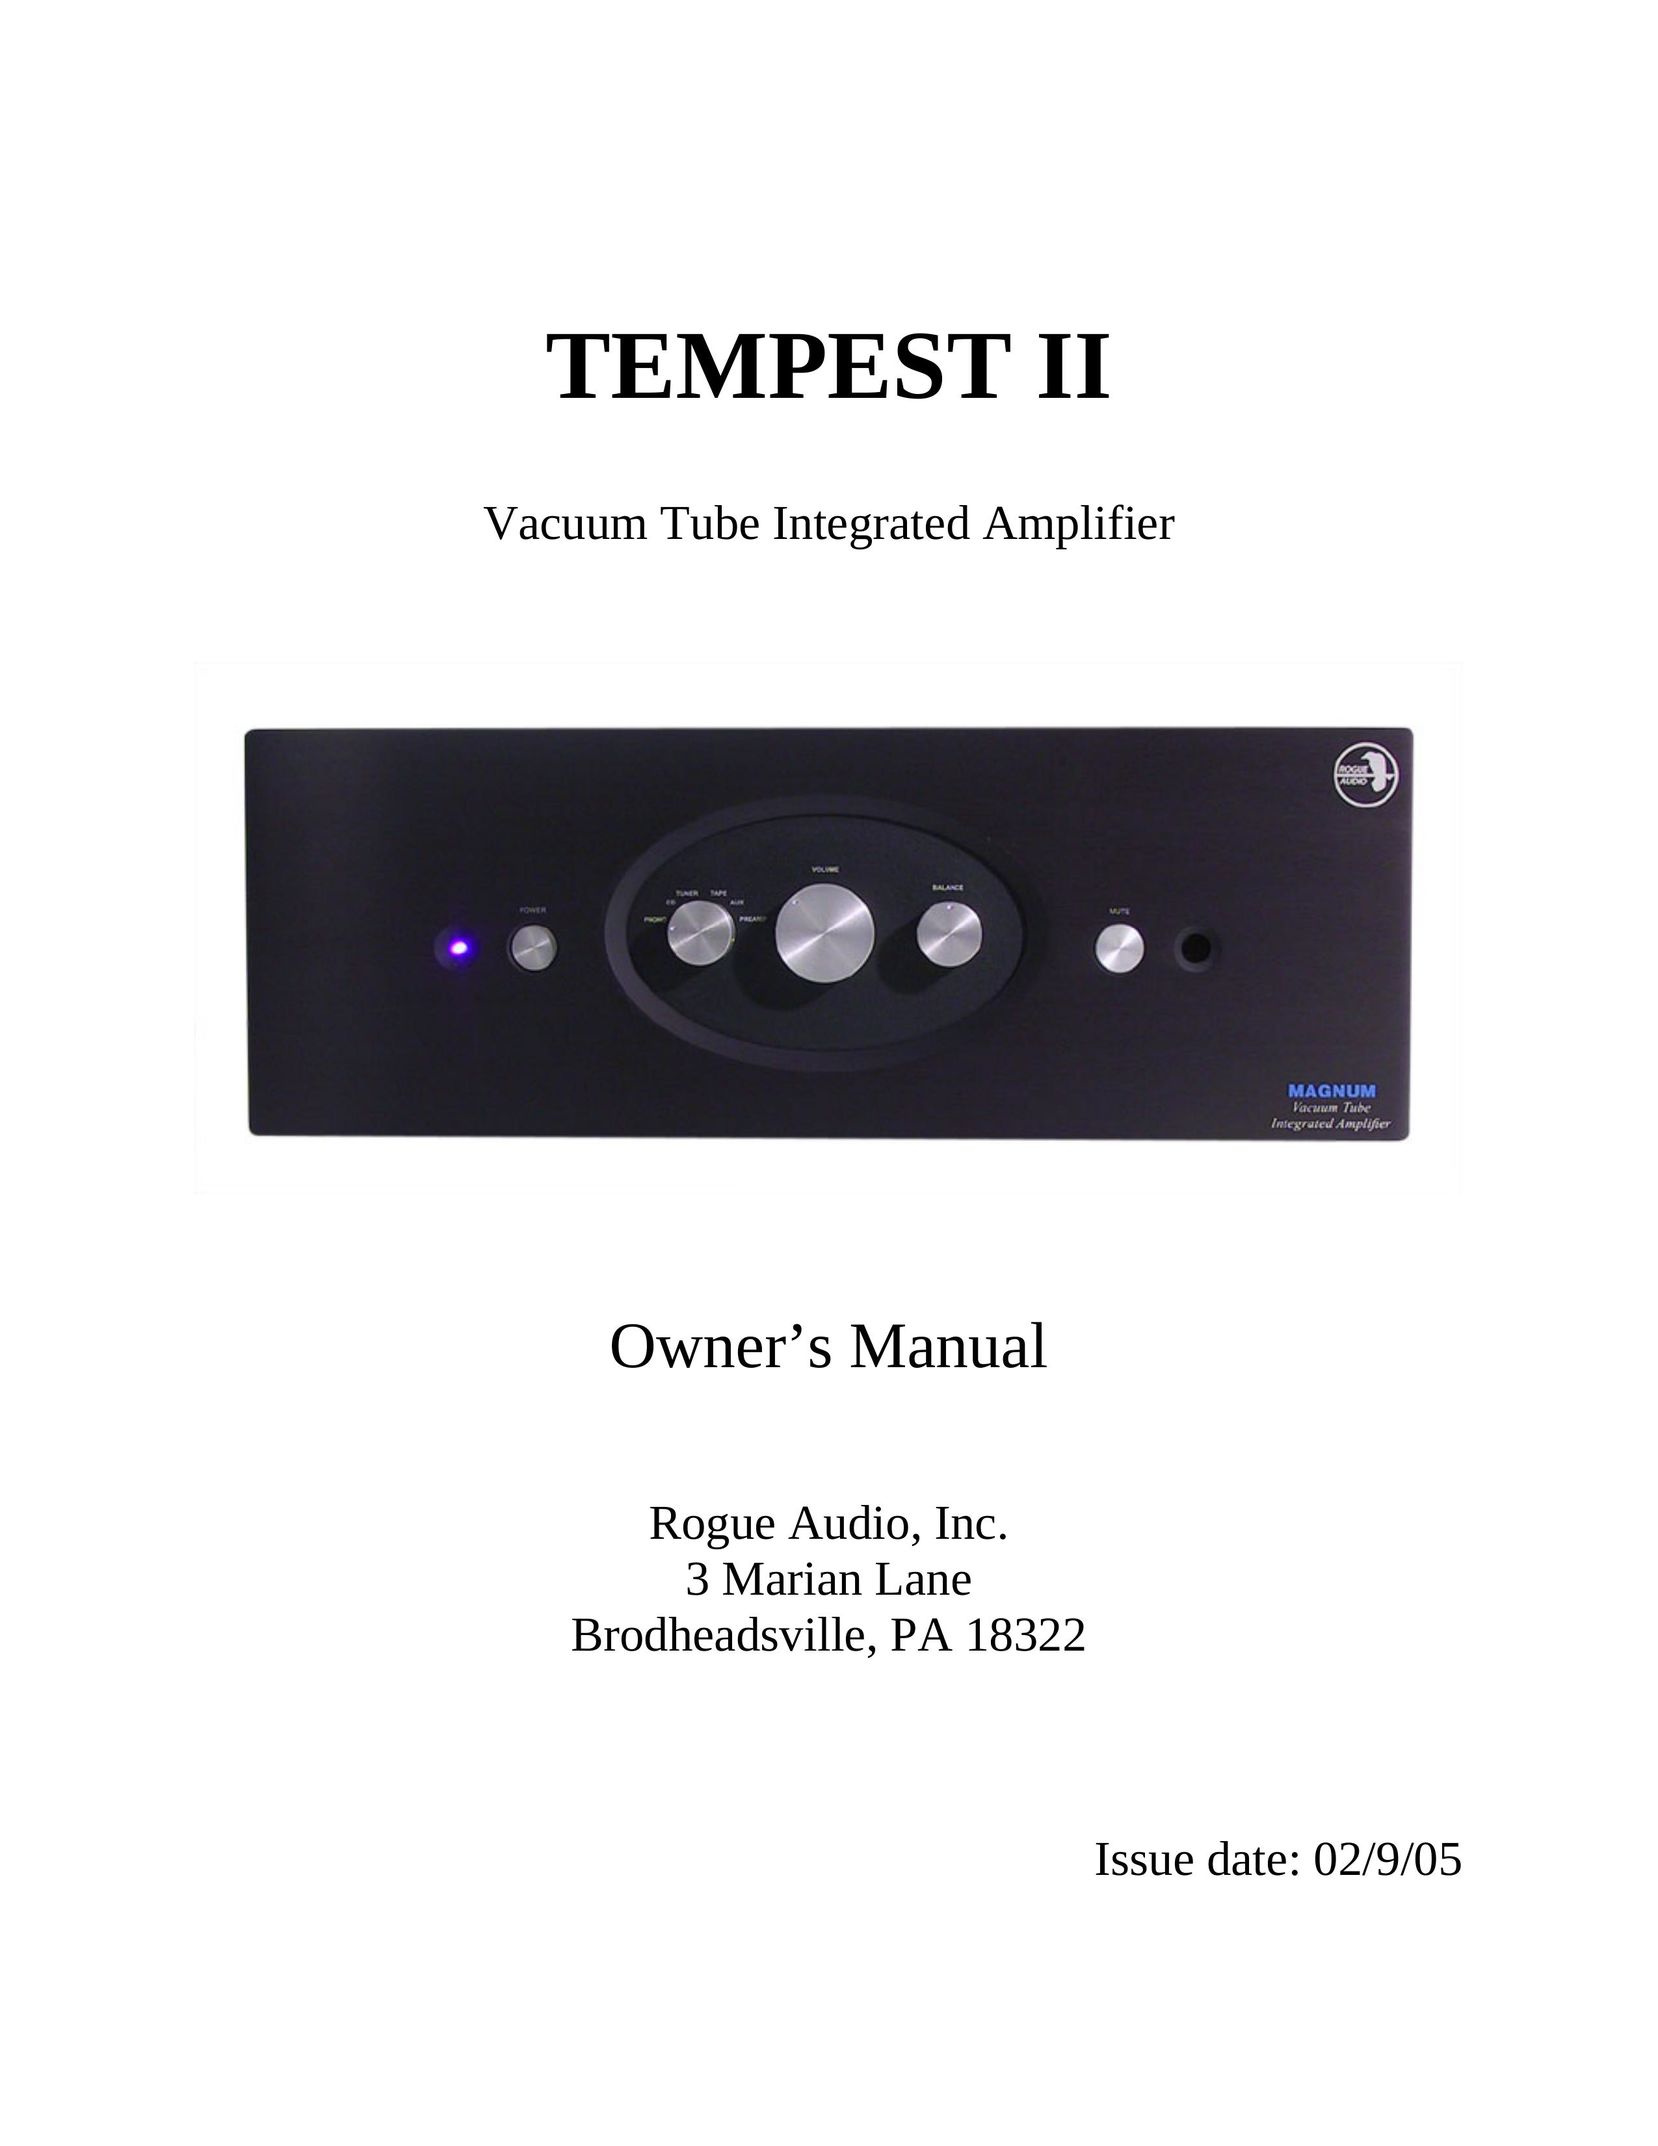 Rogue Audio TEMPEST II Stereo Amplifier User Manual